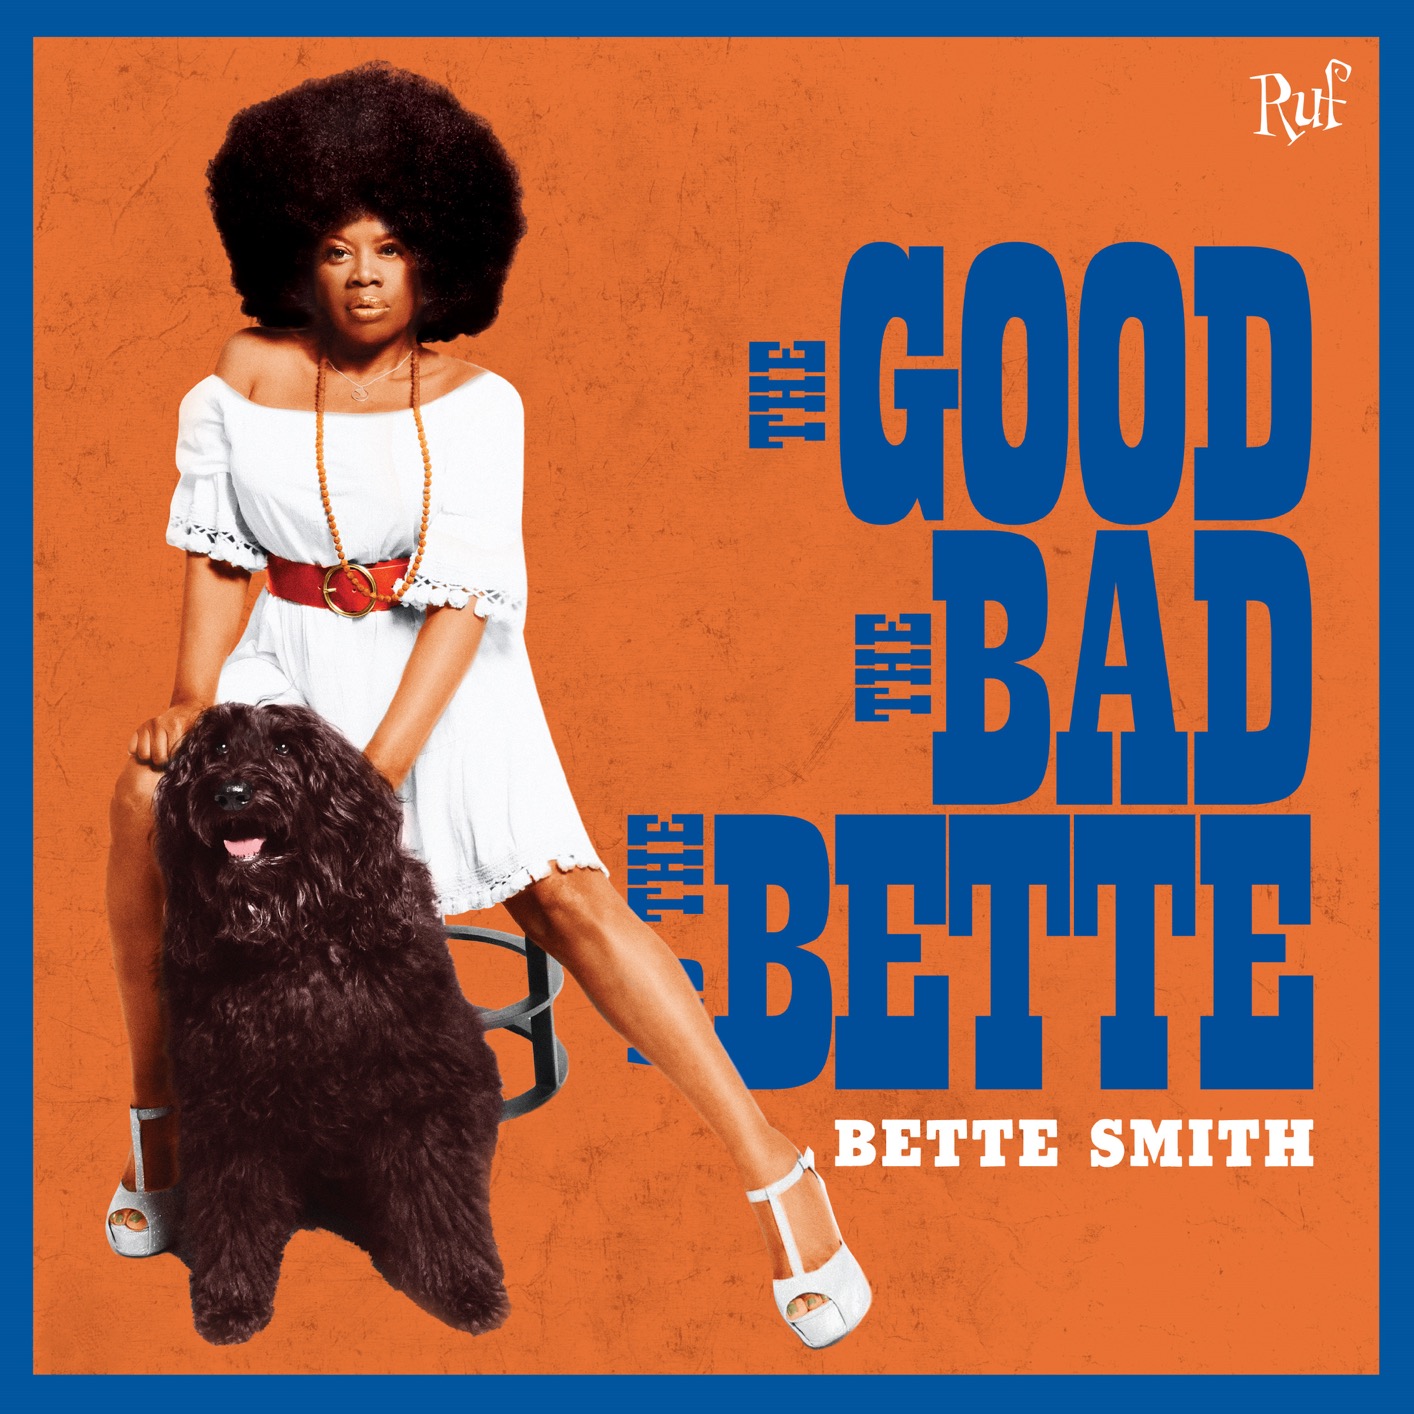 Bette Smith – The Good, The Bad And The Bette (2020) [FLAC 24bit/48kHz]